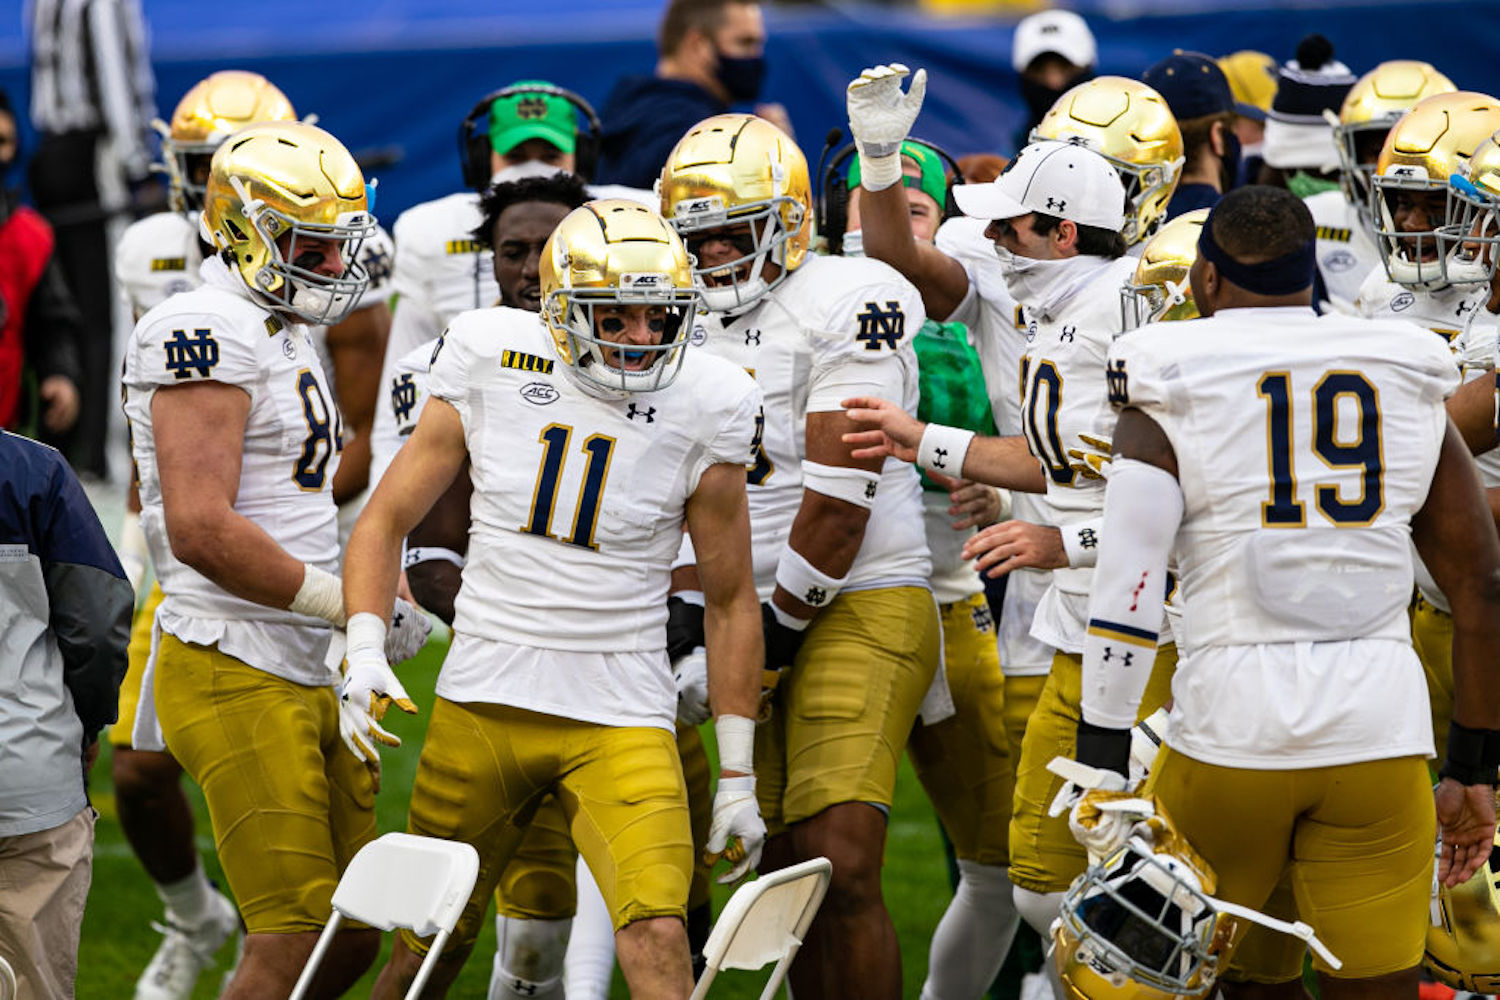 Notre Dame faces off against Clemson on Saturday night in college football's game of the week. Do they have any chance to pull off the upset?